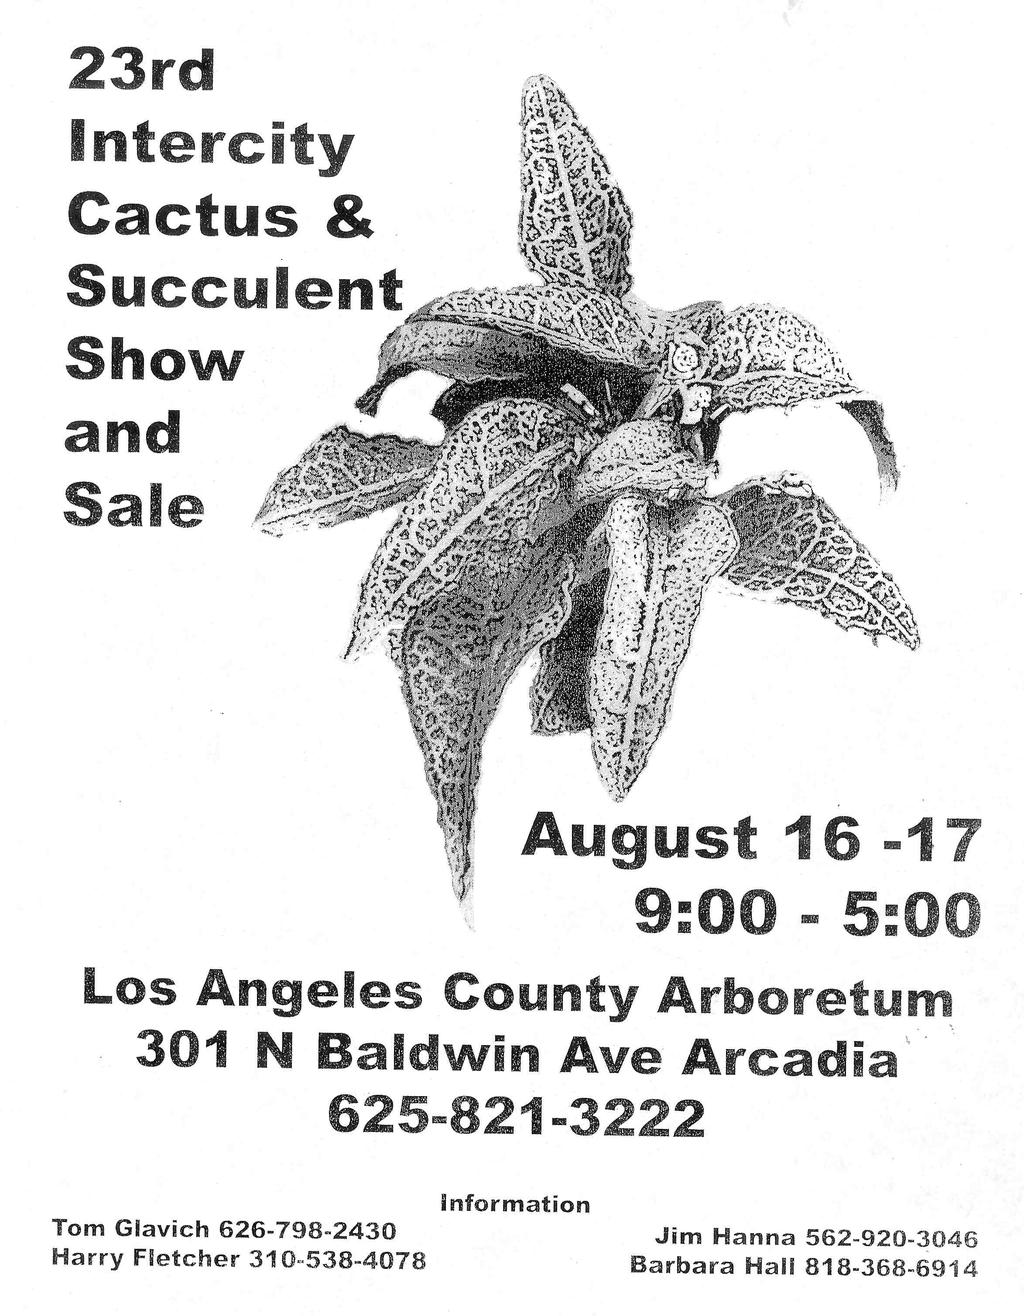 The Upcoming Show & Sale by Stephen Cooley Our Annual Cactus & Succulent Show & Sale is coming up on October 11 and 12 at the East Hills Mall.